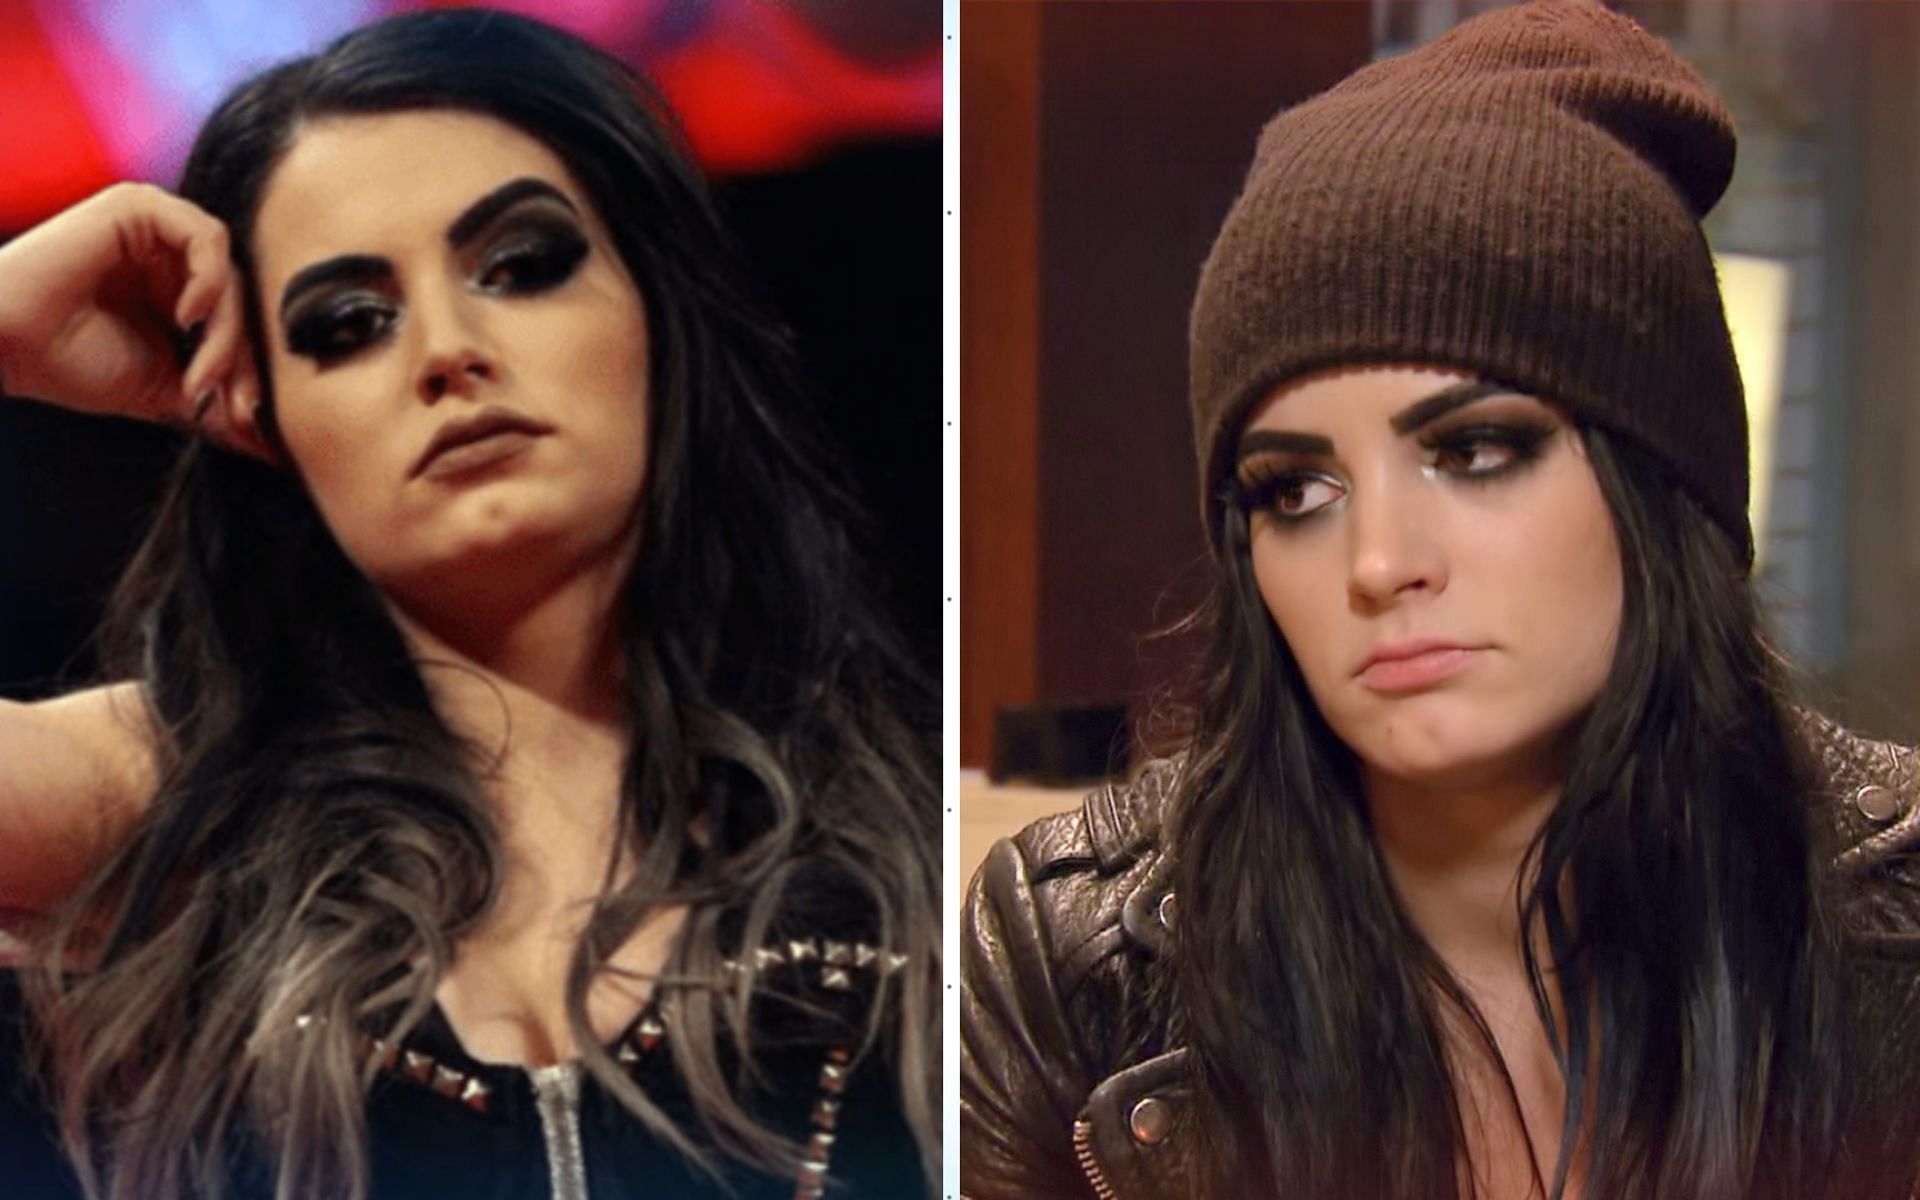 Former WWE Superstar and two-time Divas Champion Paige